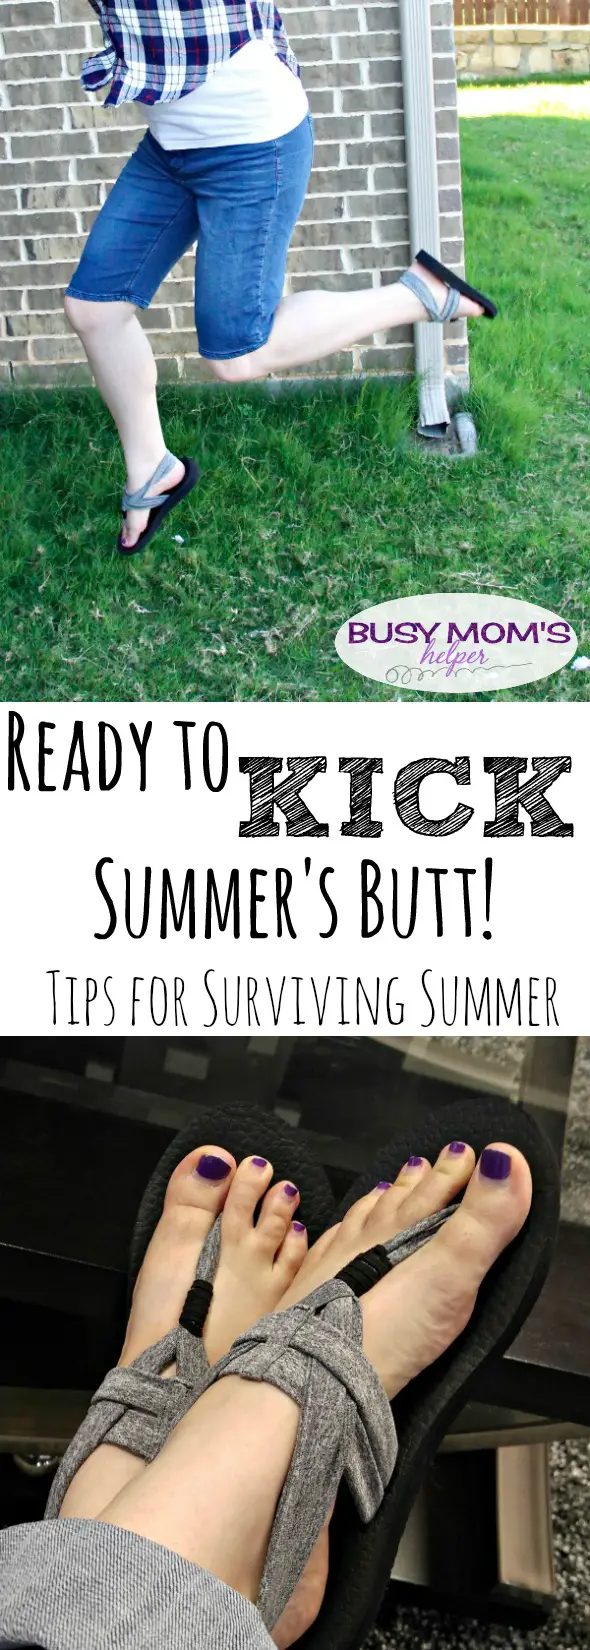 Ready To Kick Summers Butt / Tips for surviving summer / by BusyMomsHelper.com #ad #FamousFootwear @famousfootwear